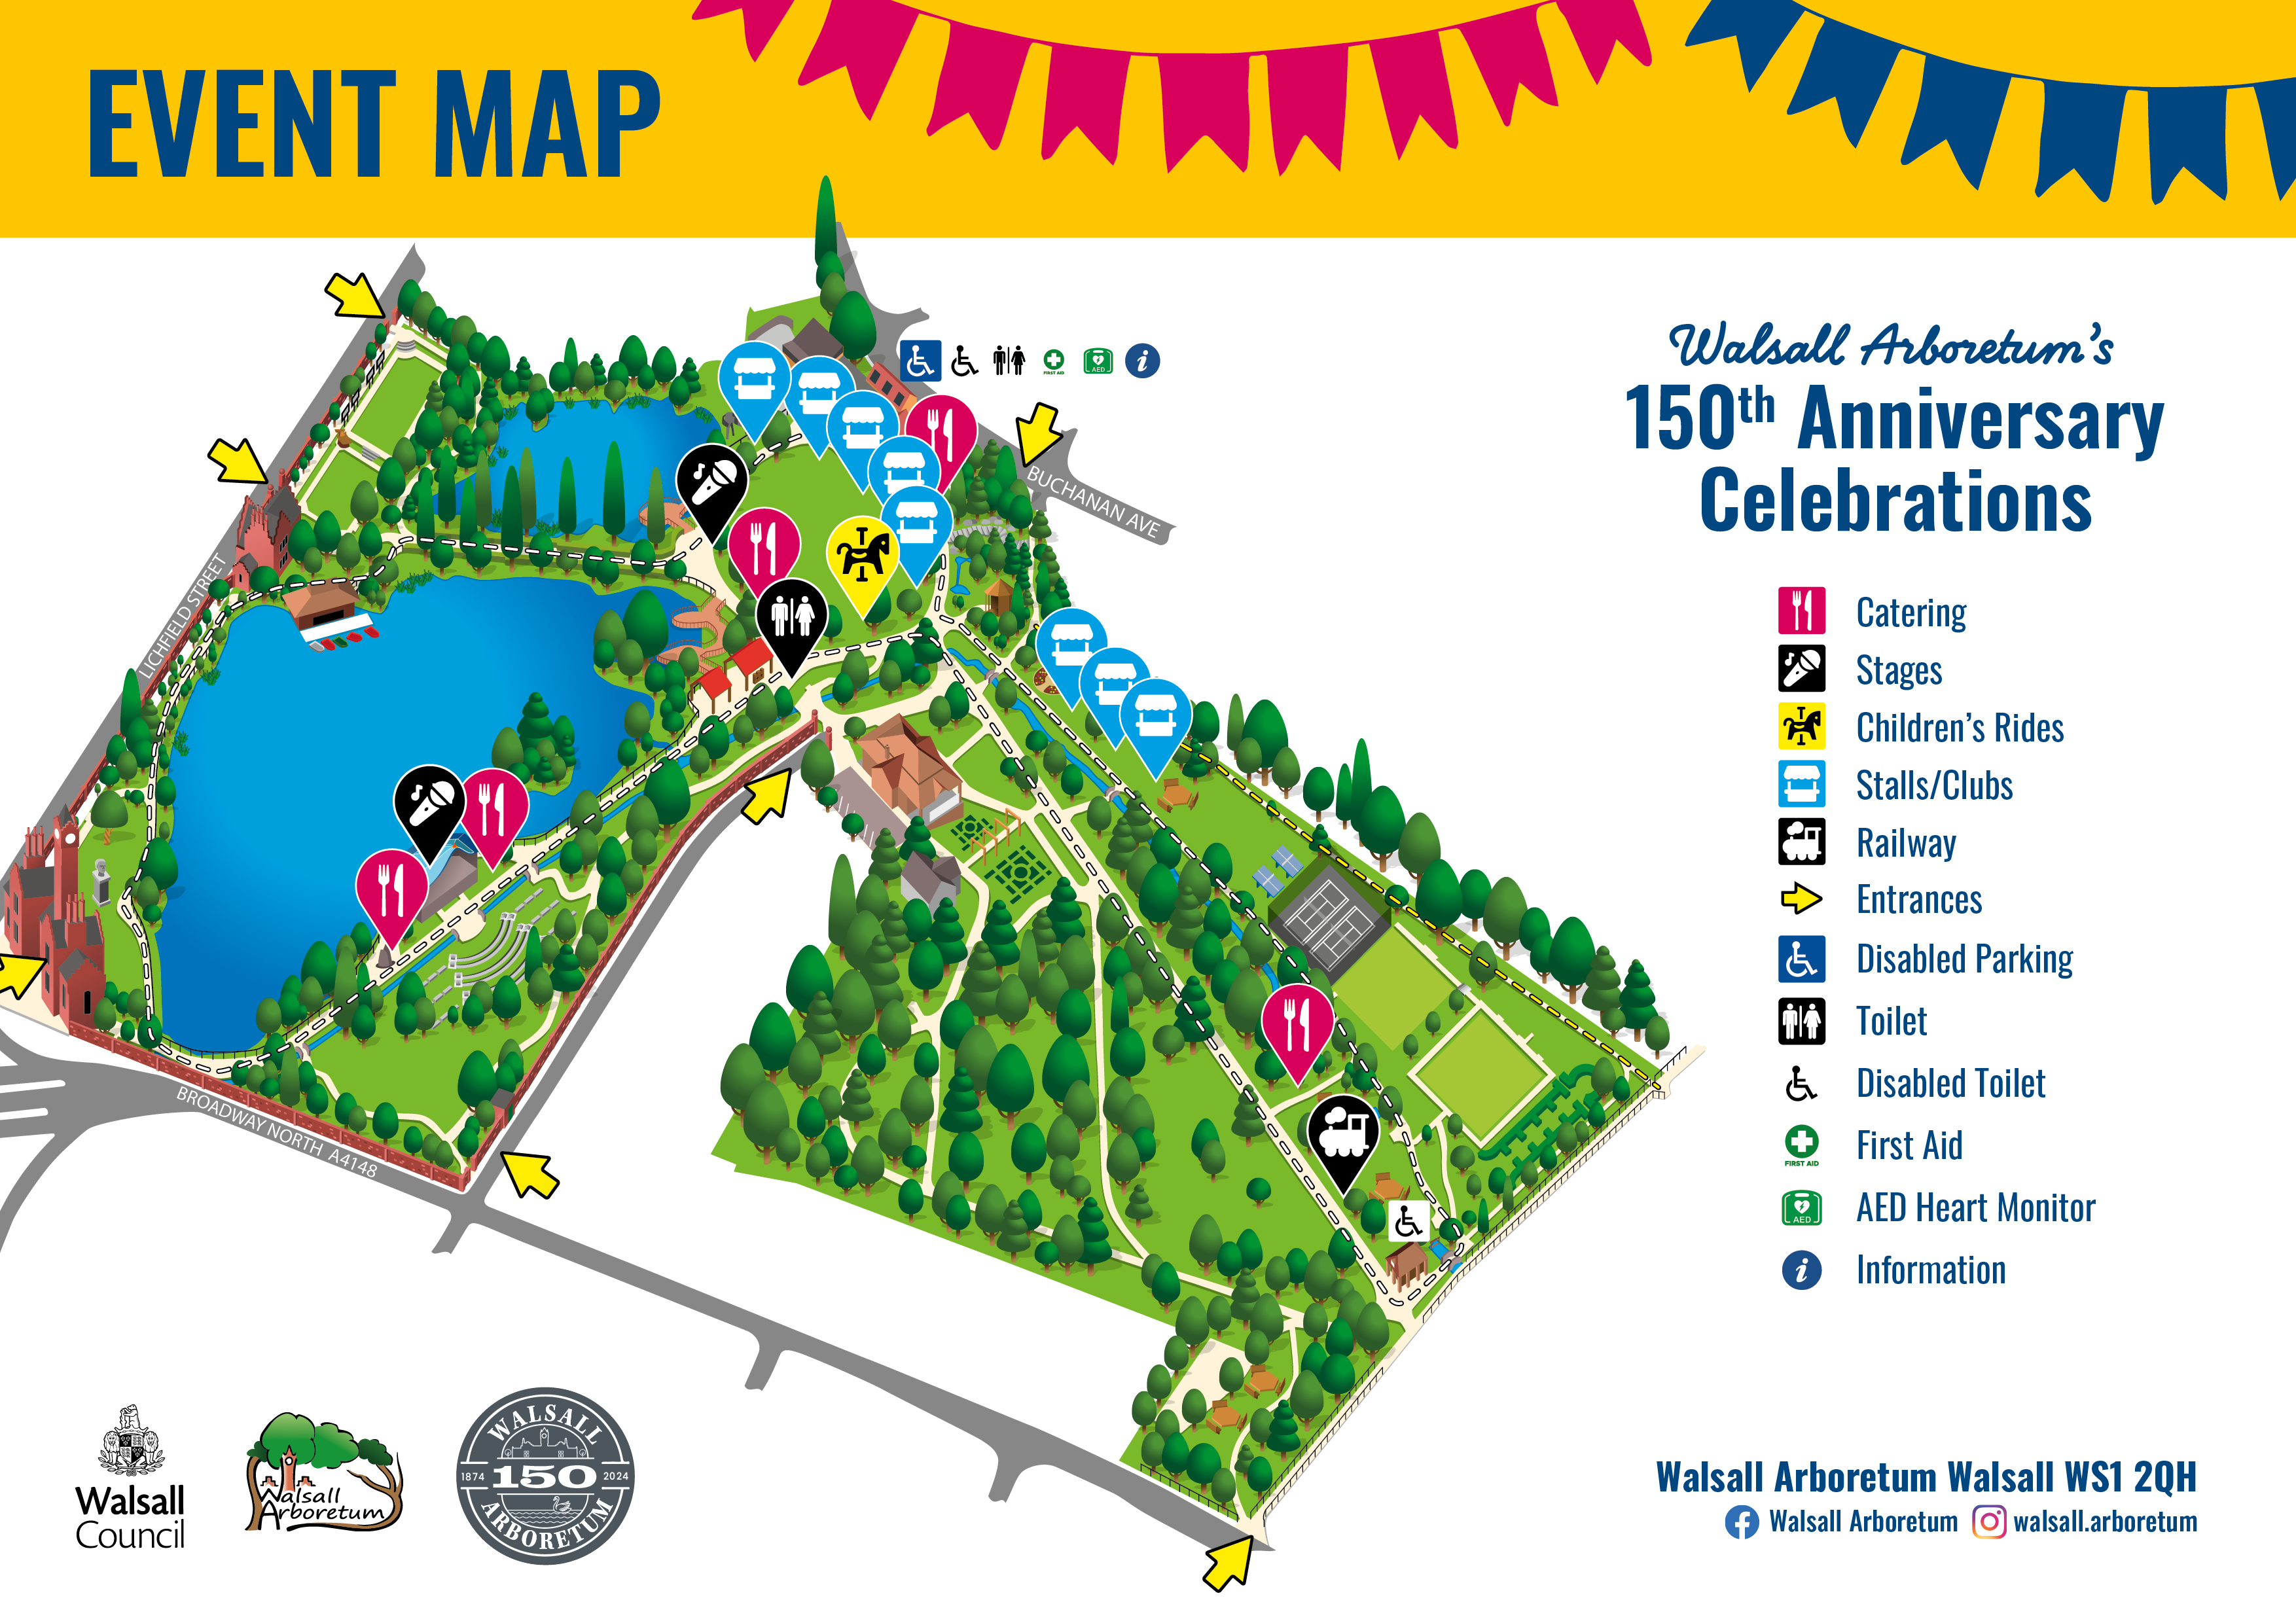 Map of Walsall Arboretum with a key, showing what's on and where at the event on 4 May.